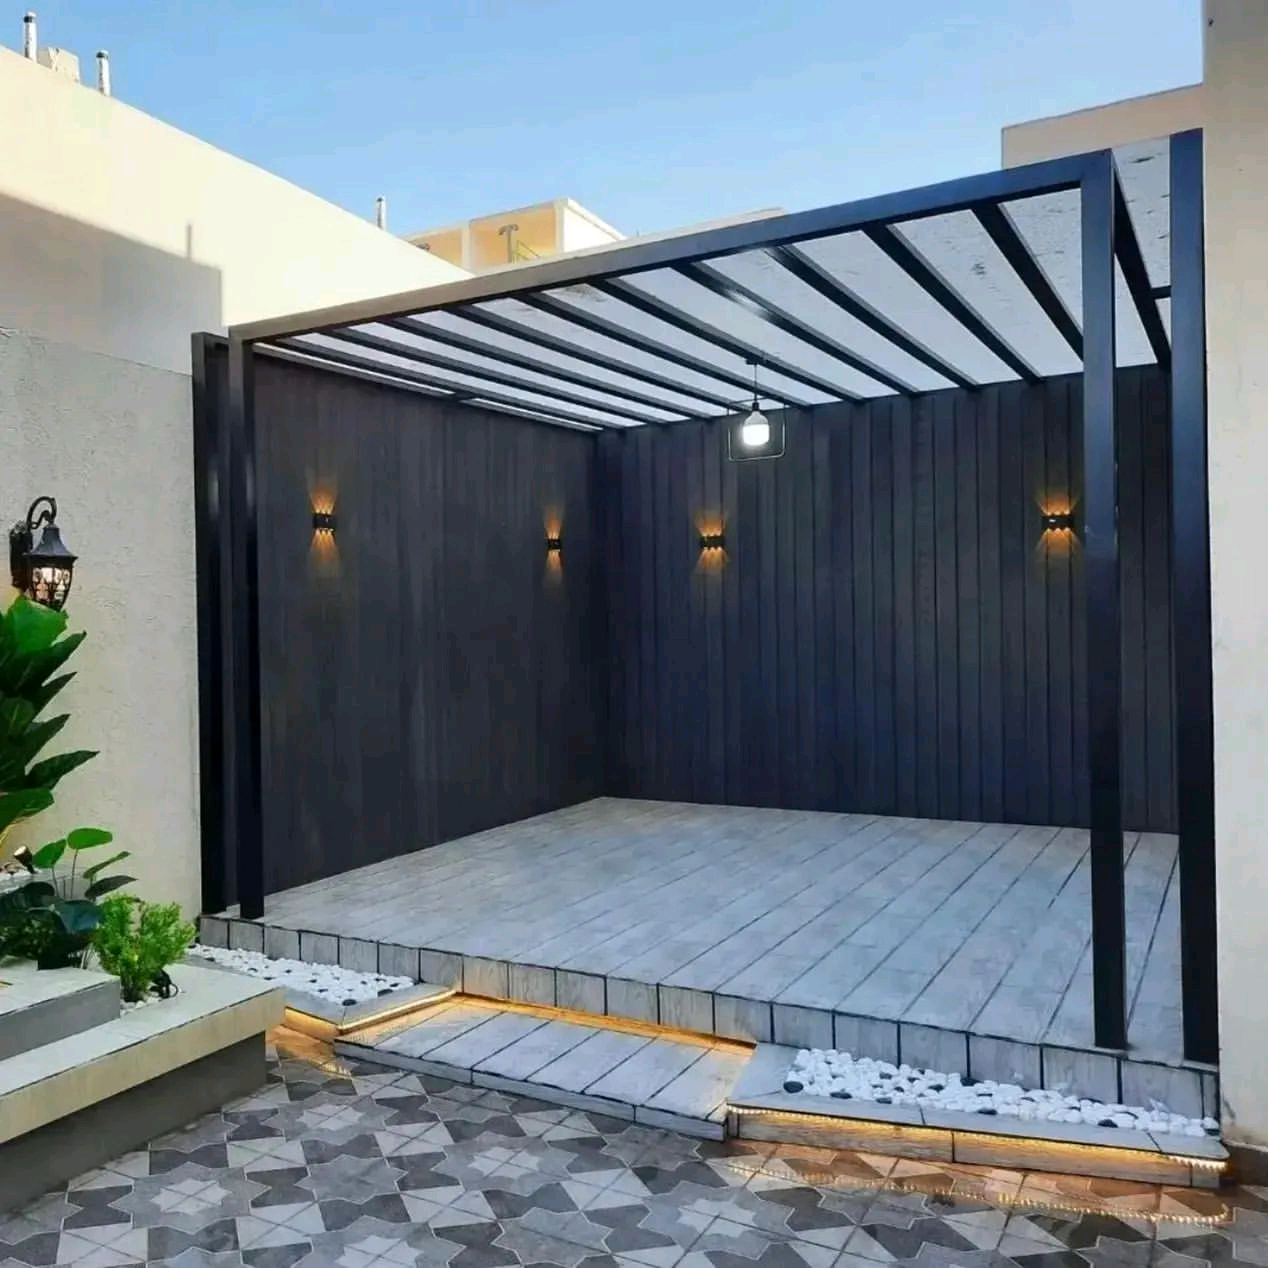 KCJ Landscaping is a leading pergola design company in Dubai. A pergola can elevate the look and feel of your garden to another level. It is an element that can-  تصميم وتنسيق الحدائق....